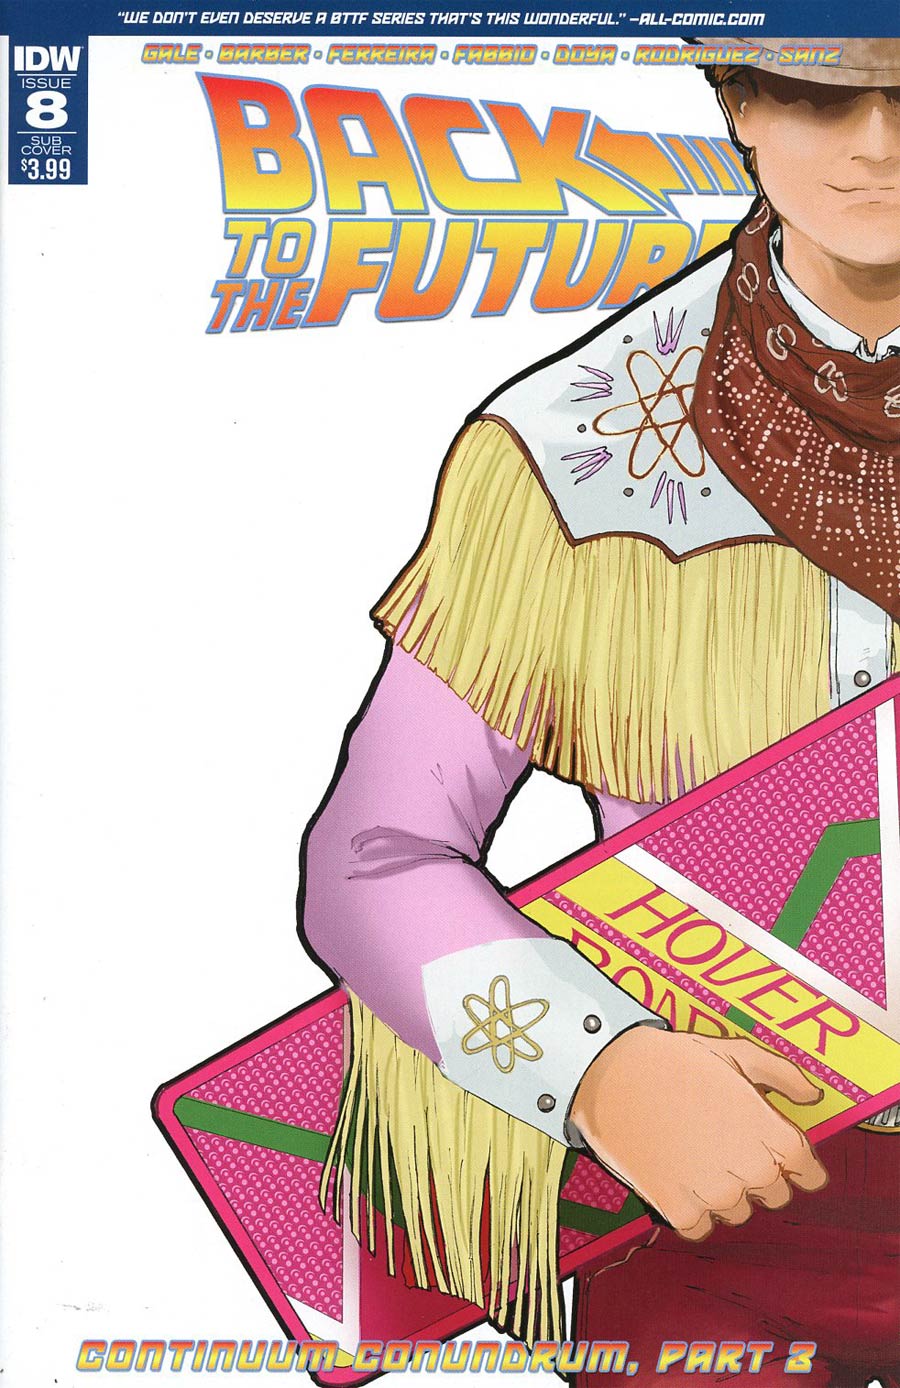 Back To The Future Vol 2 #8 Cover B Variant Andrew Griffith Subscription Cover